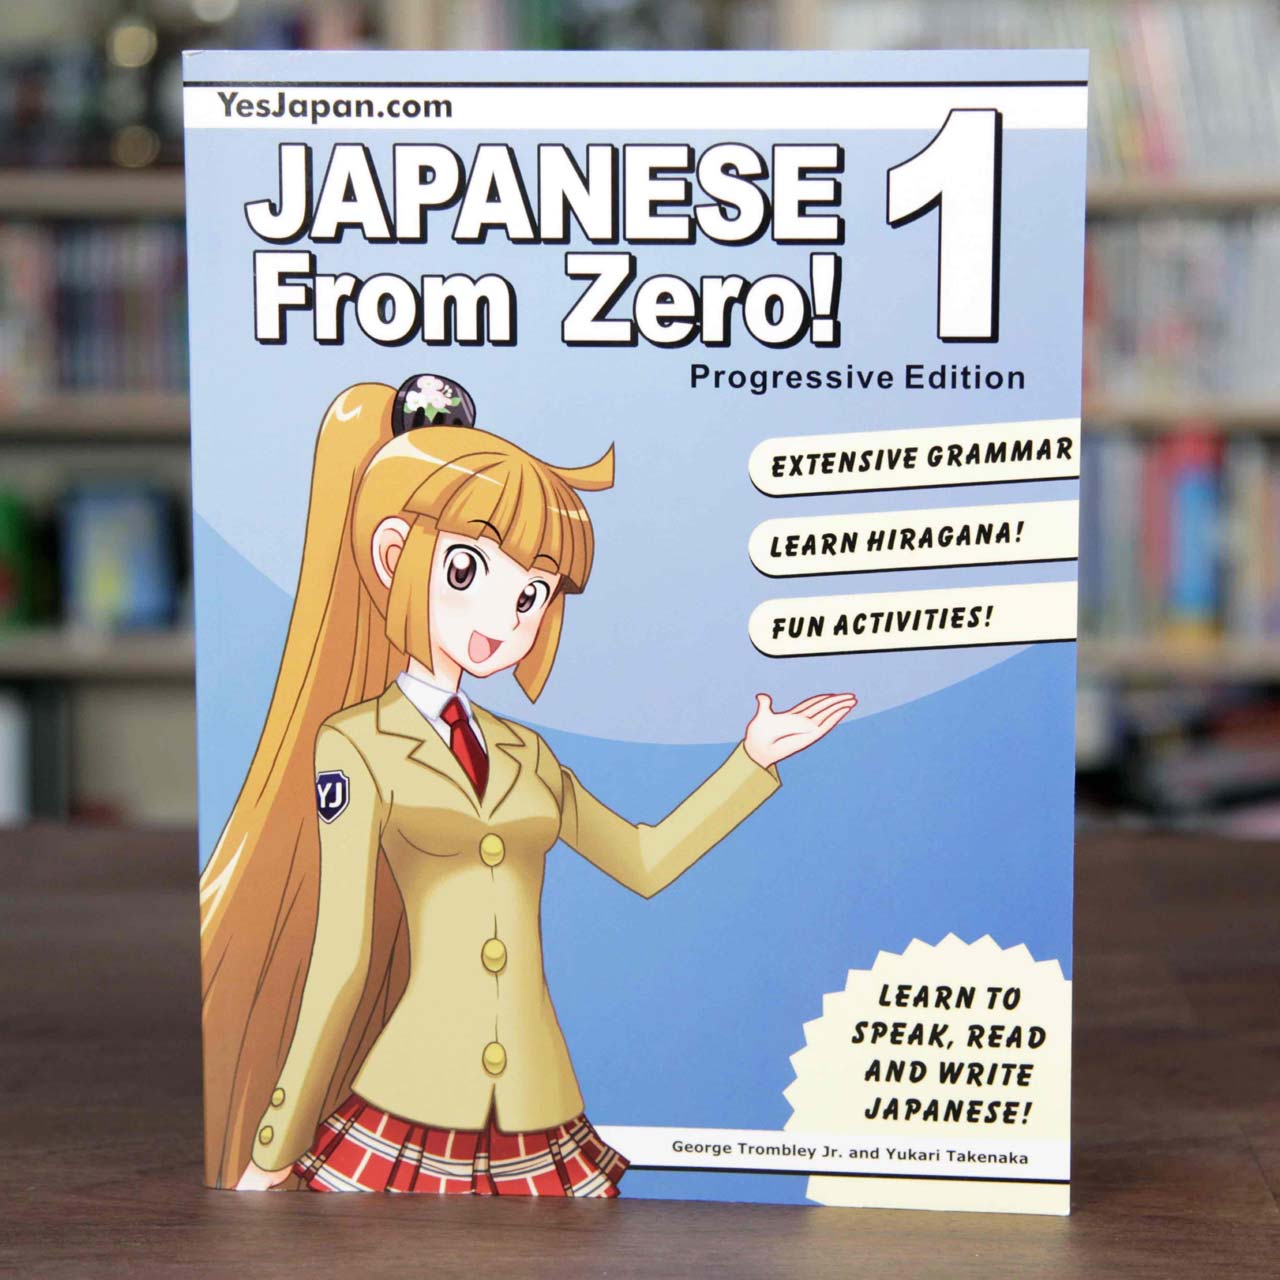 photo of the japanese from zero book on a table